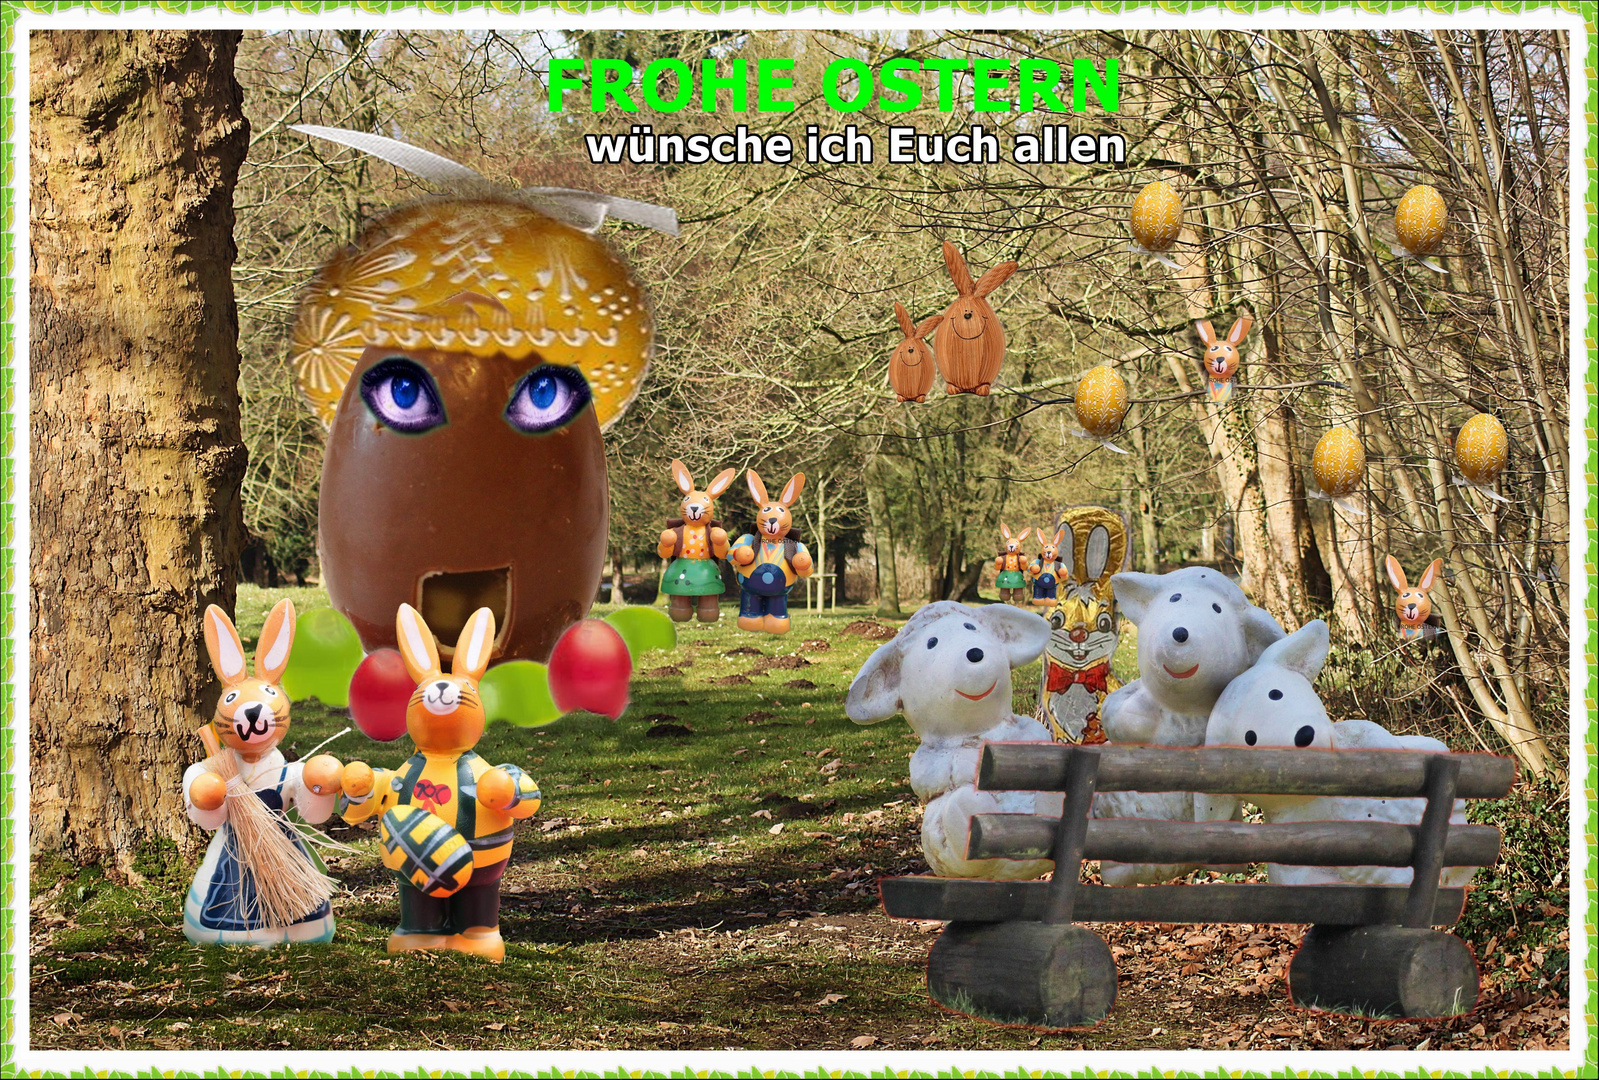 FROHE OSTERN 